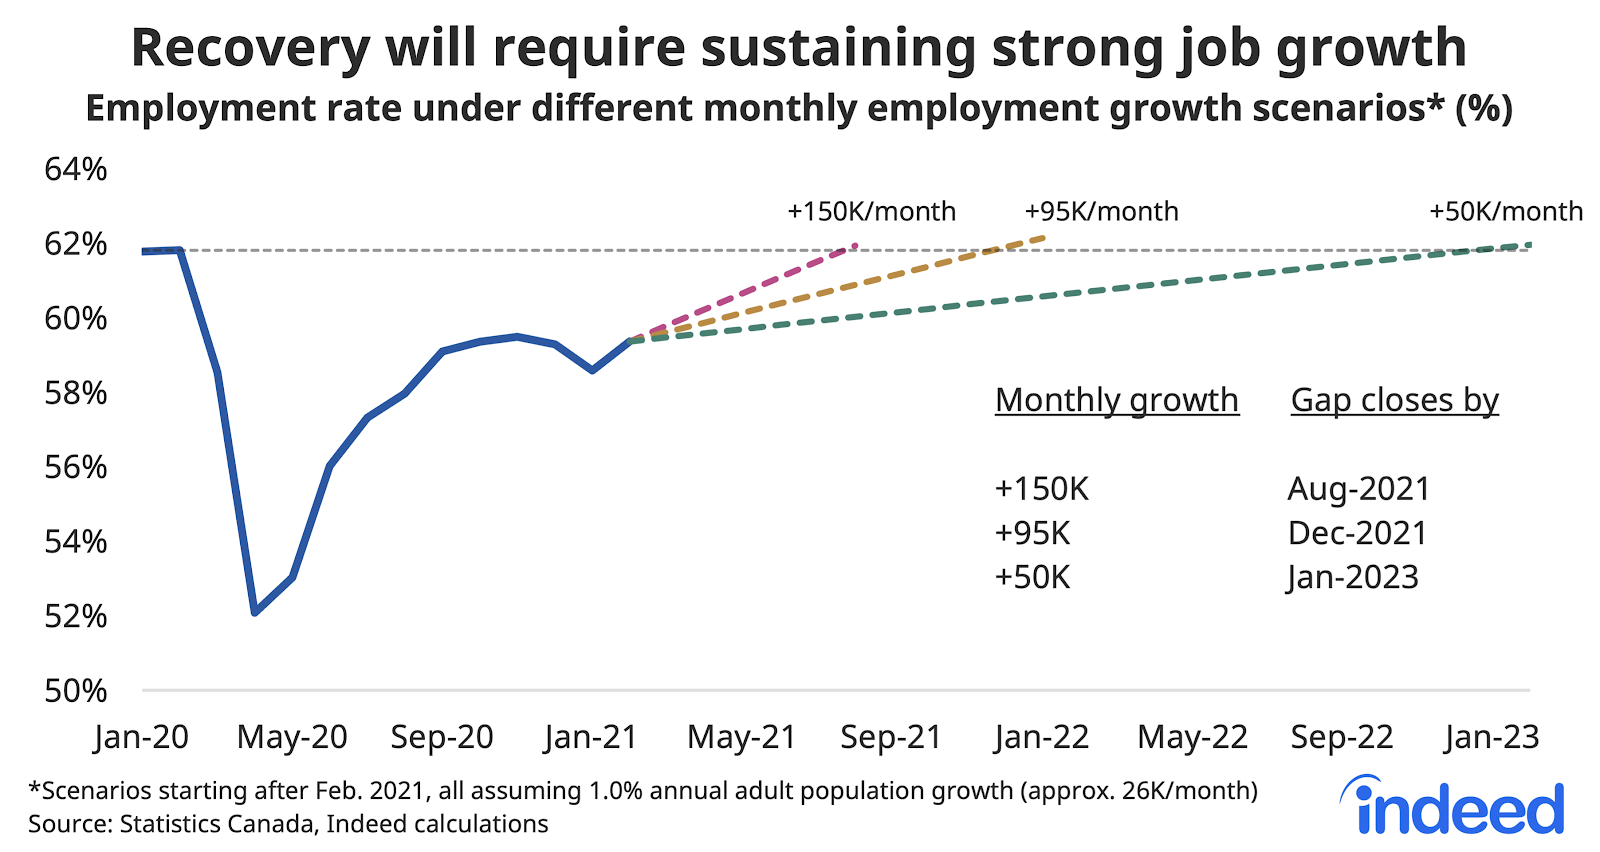 Line graph titled “Recovery will require sustaining strong growth.” With a vertical axis ranging from 50% to 64%, Indeed tracked the employment rate under different month employment growth scenarios along a horizontal axis ranging from January 2020 to January 2023, with lines representing +150k per month, +95k a month, and +50k a month. Canada will likely need employment growth to average roughly 95,000 per month over the rest of the year for the current gap to close before 2022. Caption added post-publication.